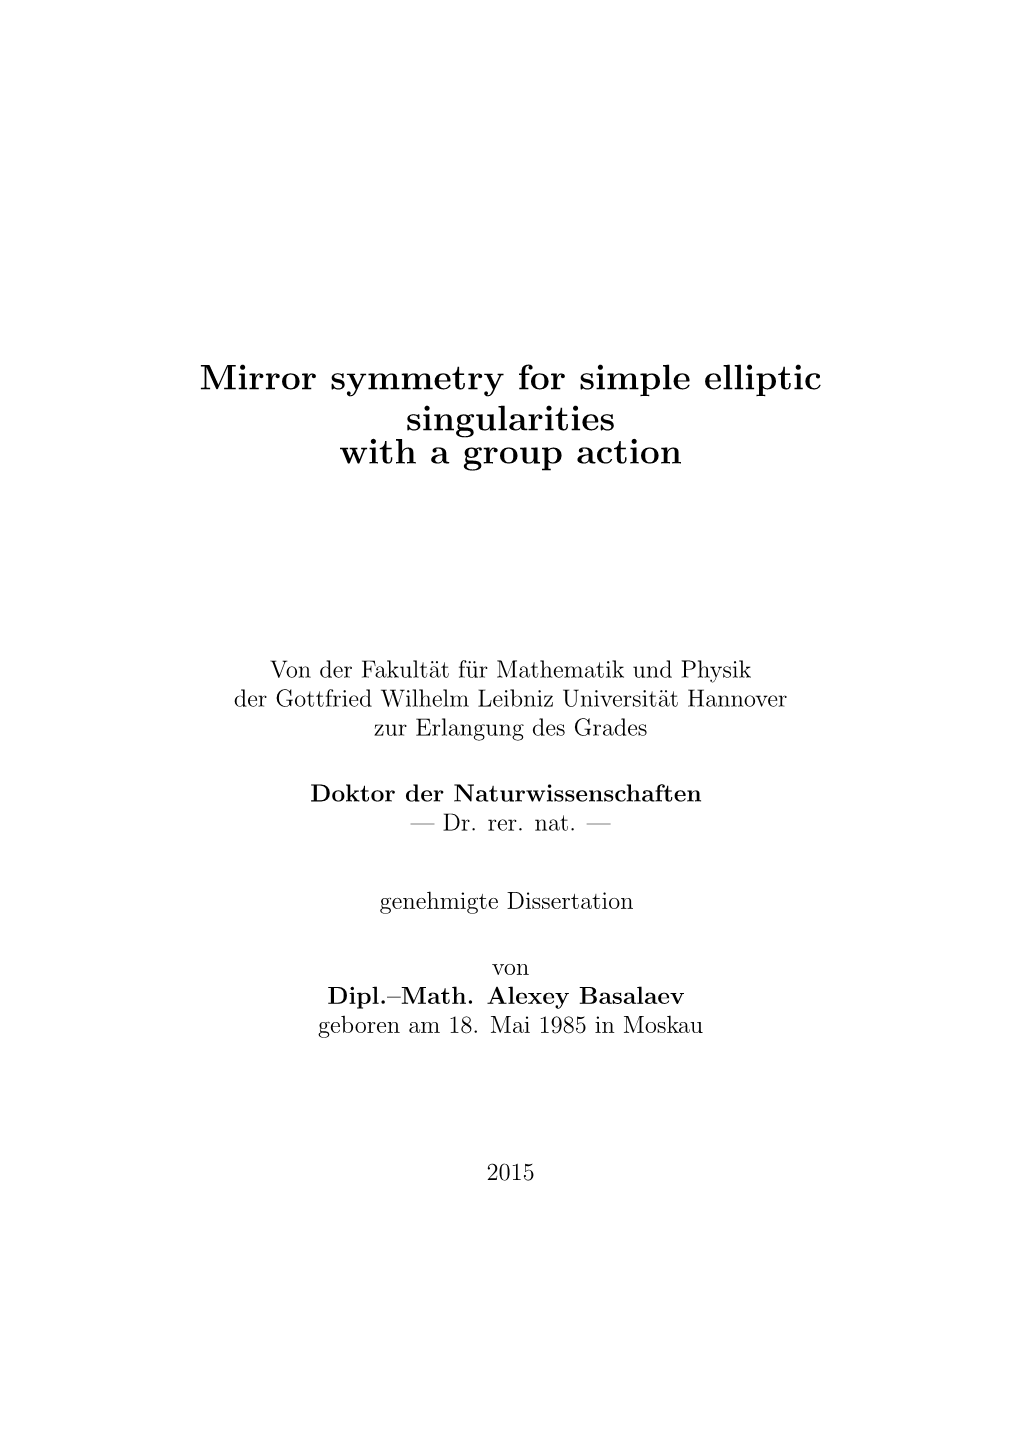 Mirror Symmetry for Simple Elliptic Singularities with a Group Action